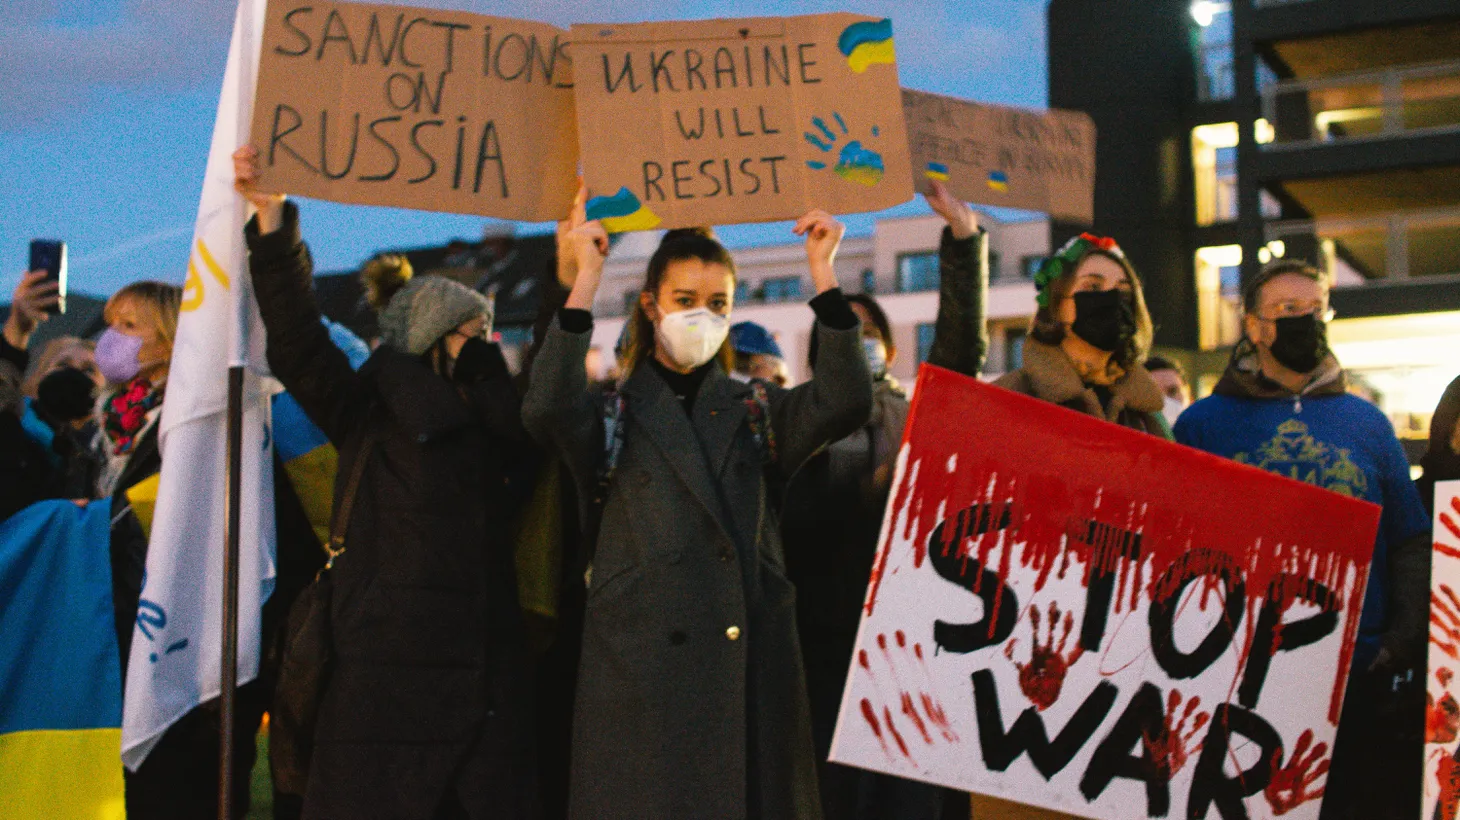 Protesters hold the signs of " Ukraine will resist" and "Stop War " during the protest in front of State parlament in Duesseldorf, Germany on Feb 23, 2022